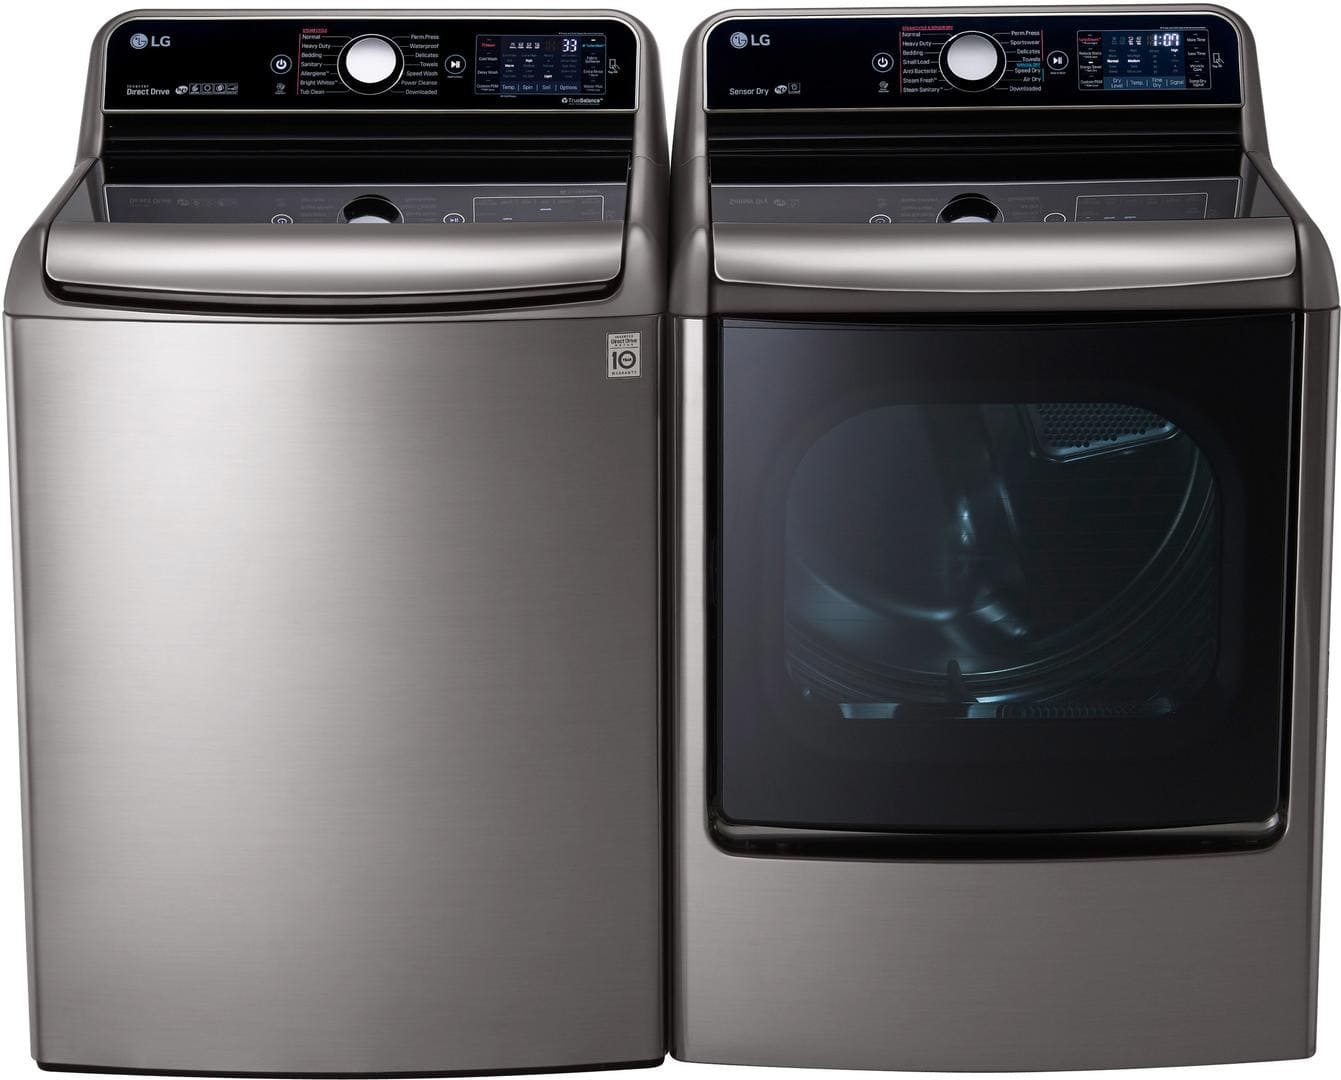 Rebates For Lg Washer And Dryer